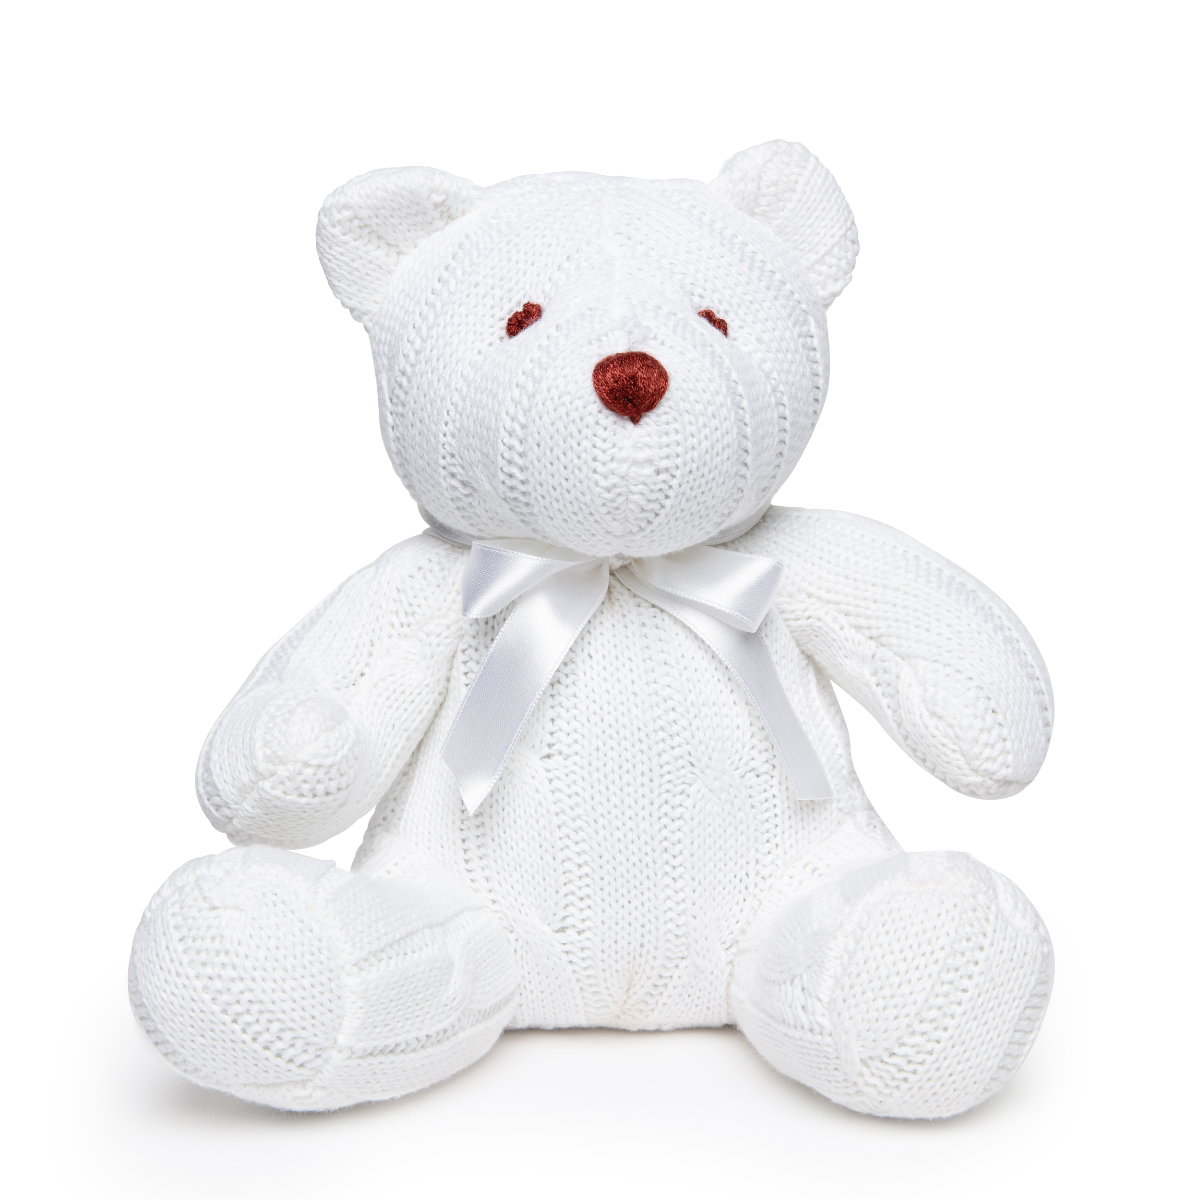 Cable-Knit Stuffed Teddy - White - ittybittybubba